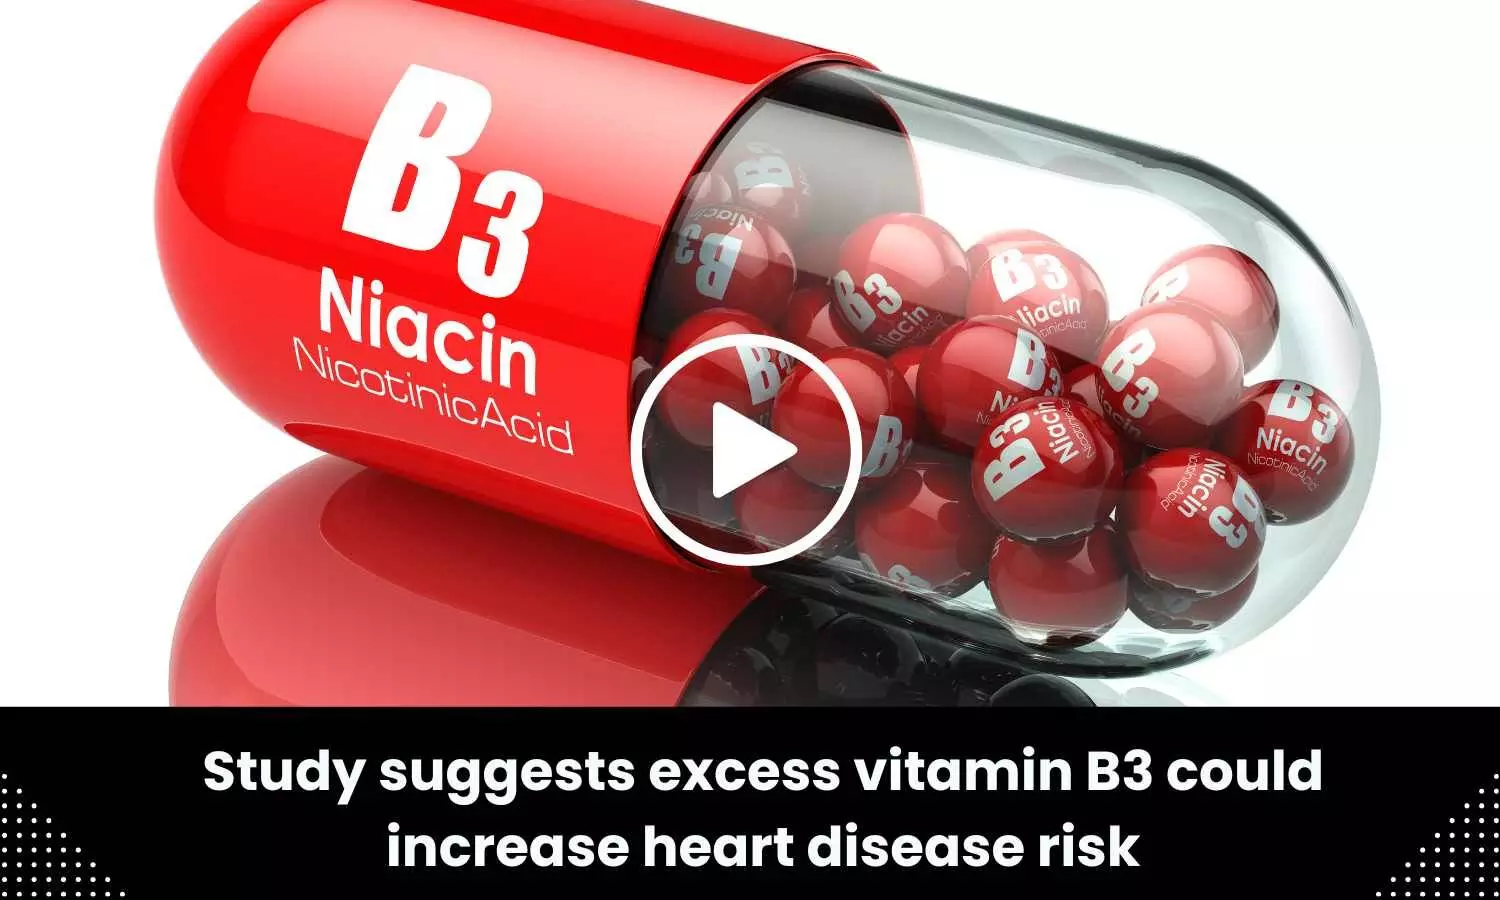 Study suggests excess vitamin B3 could increase heart disease risk